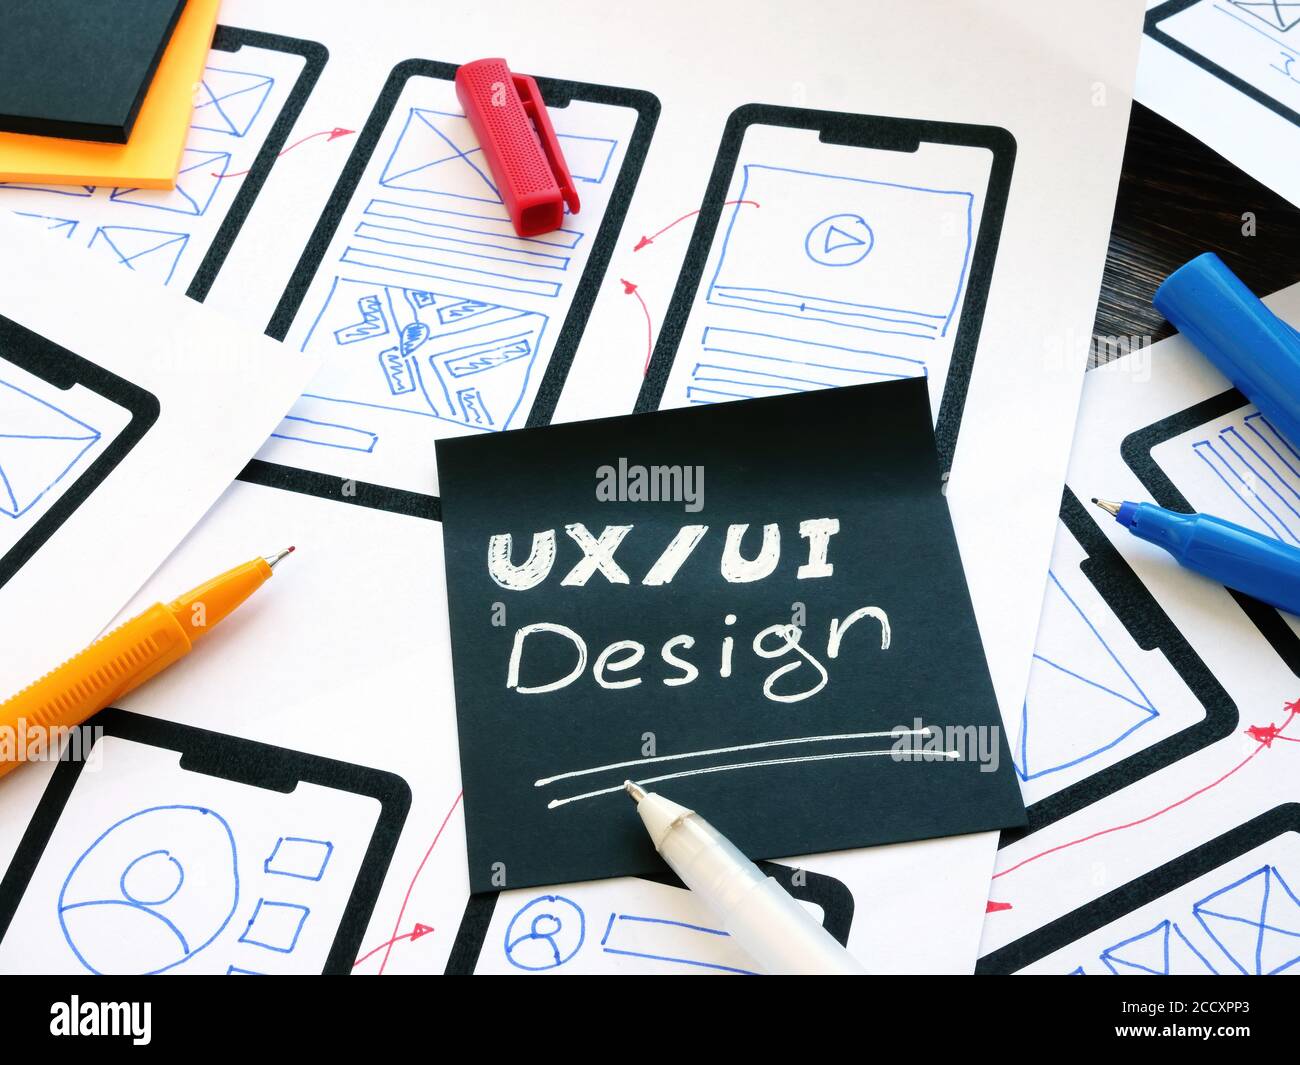 UX UI design concept. Samples of a mobile web application. Stock Photo